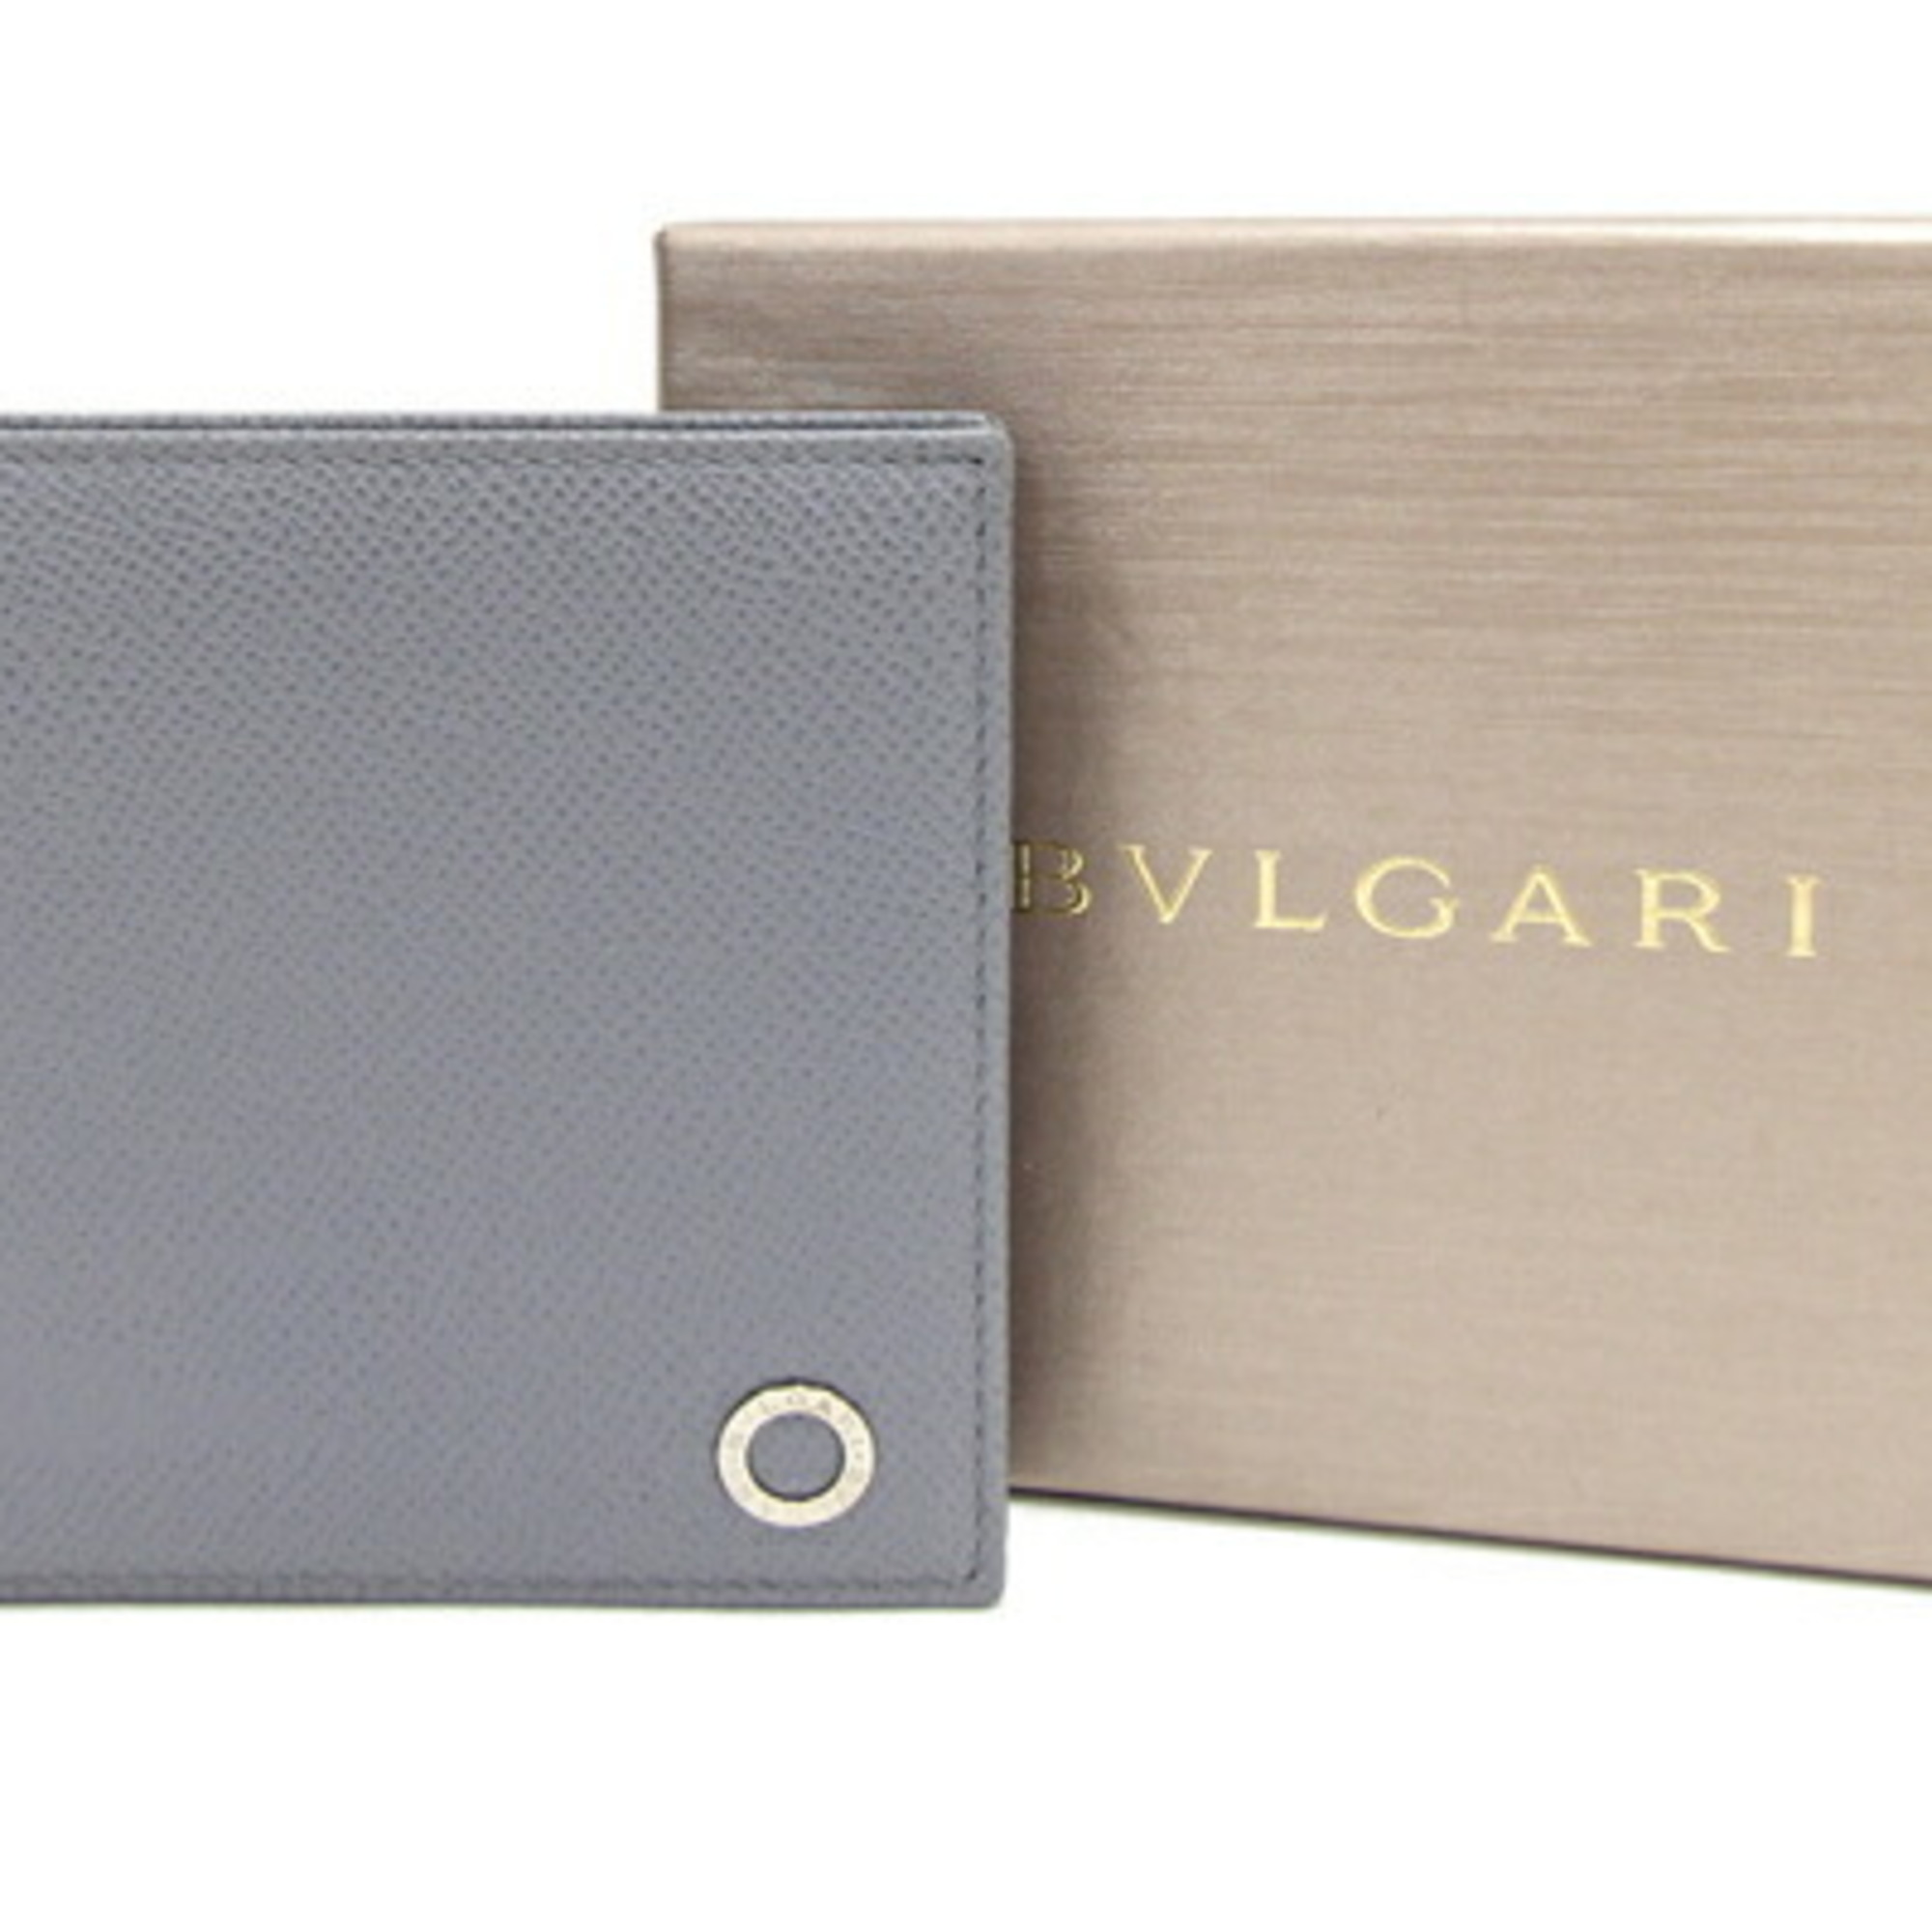 BVLGARI Bi-fold Wallet 30397 Grey Leather Compact with Coin Purse Men's